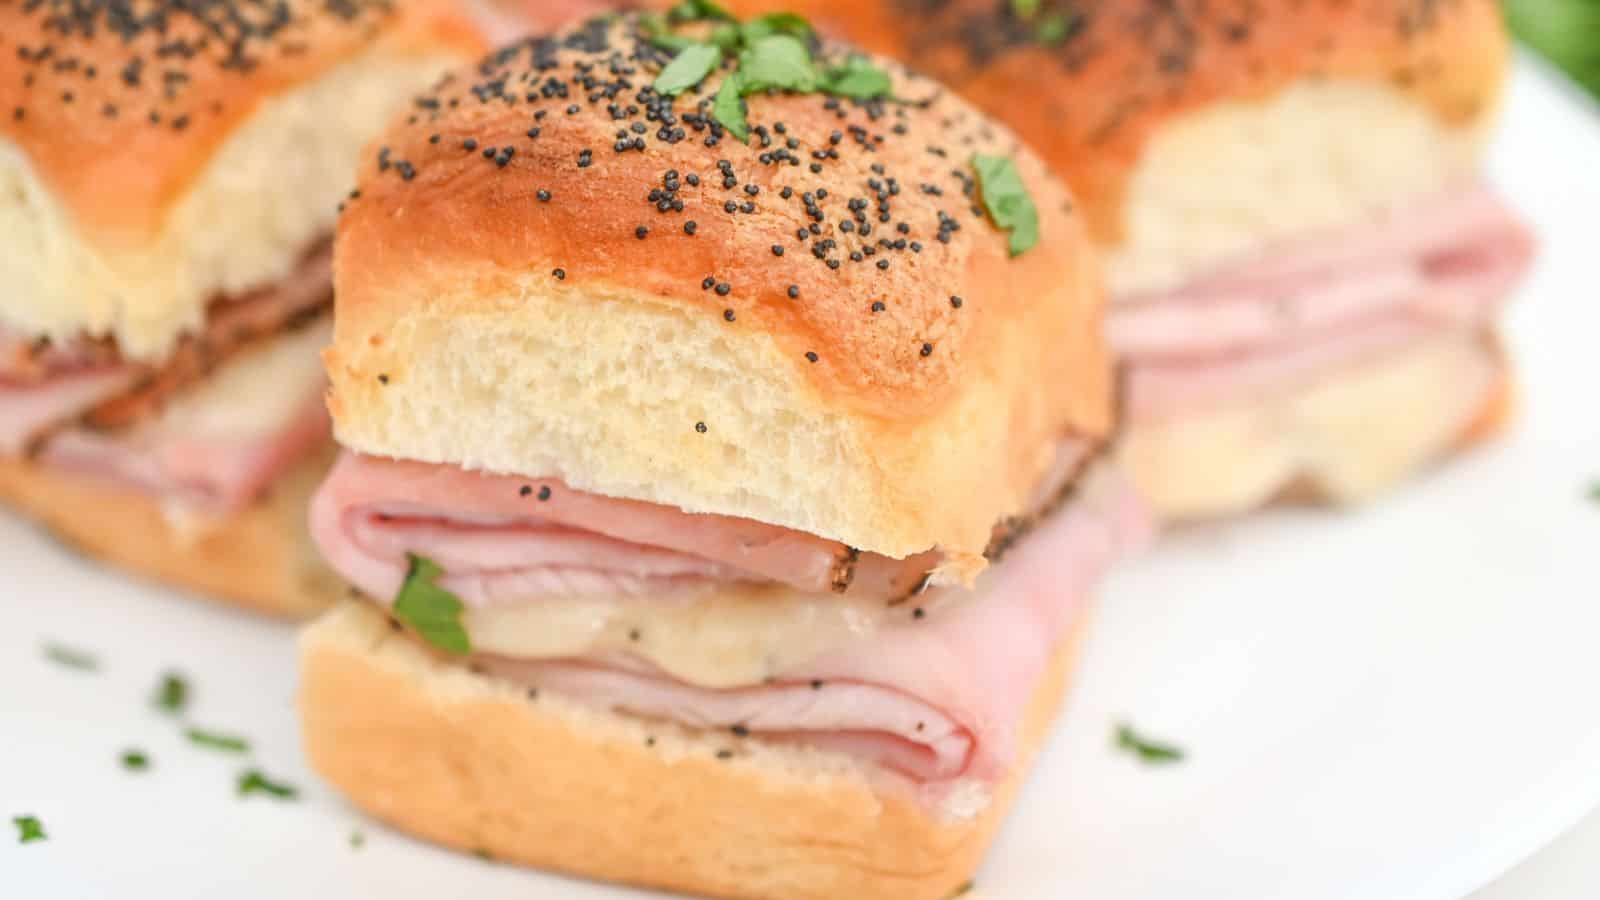 A close-up image of a platter of ham and cheese slider sandwiches sprinkled with poppy seeds and garnished with chopped herbs.